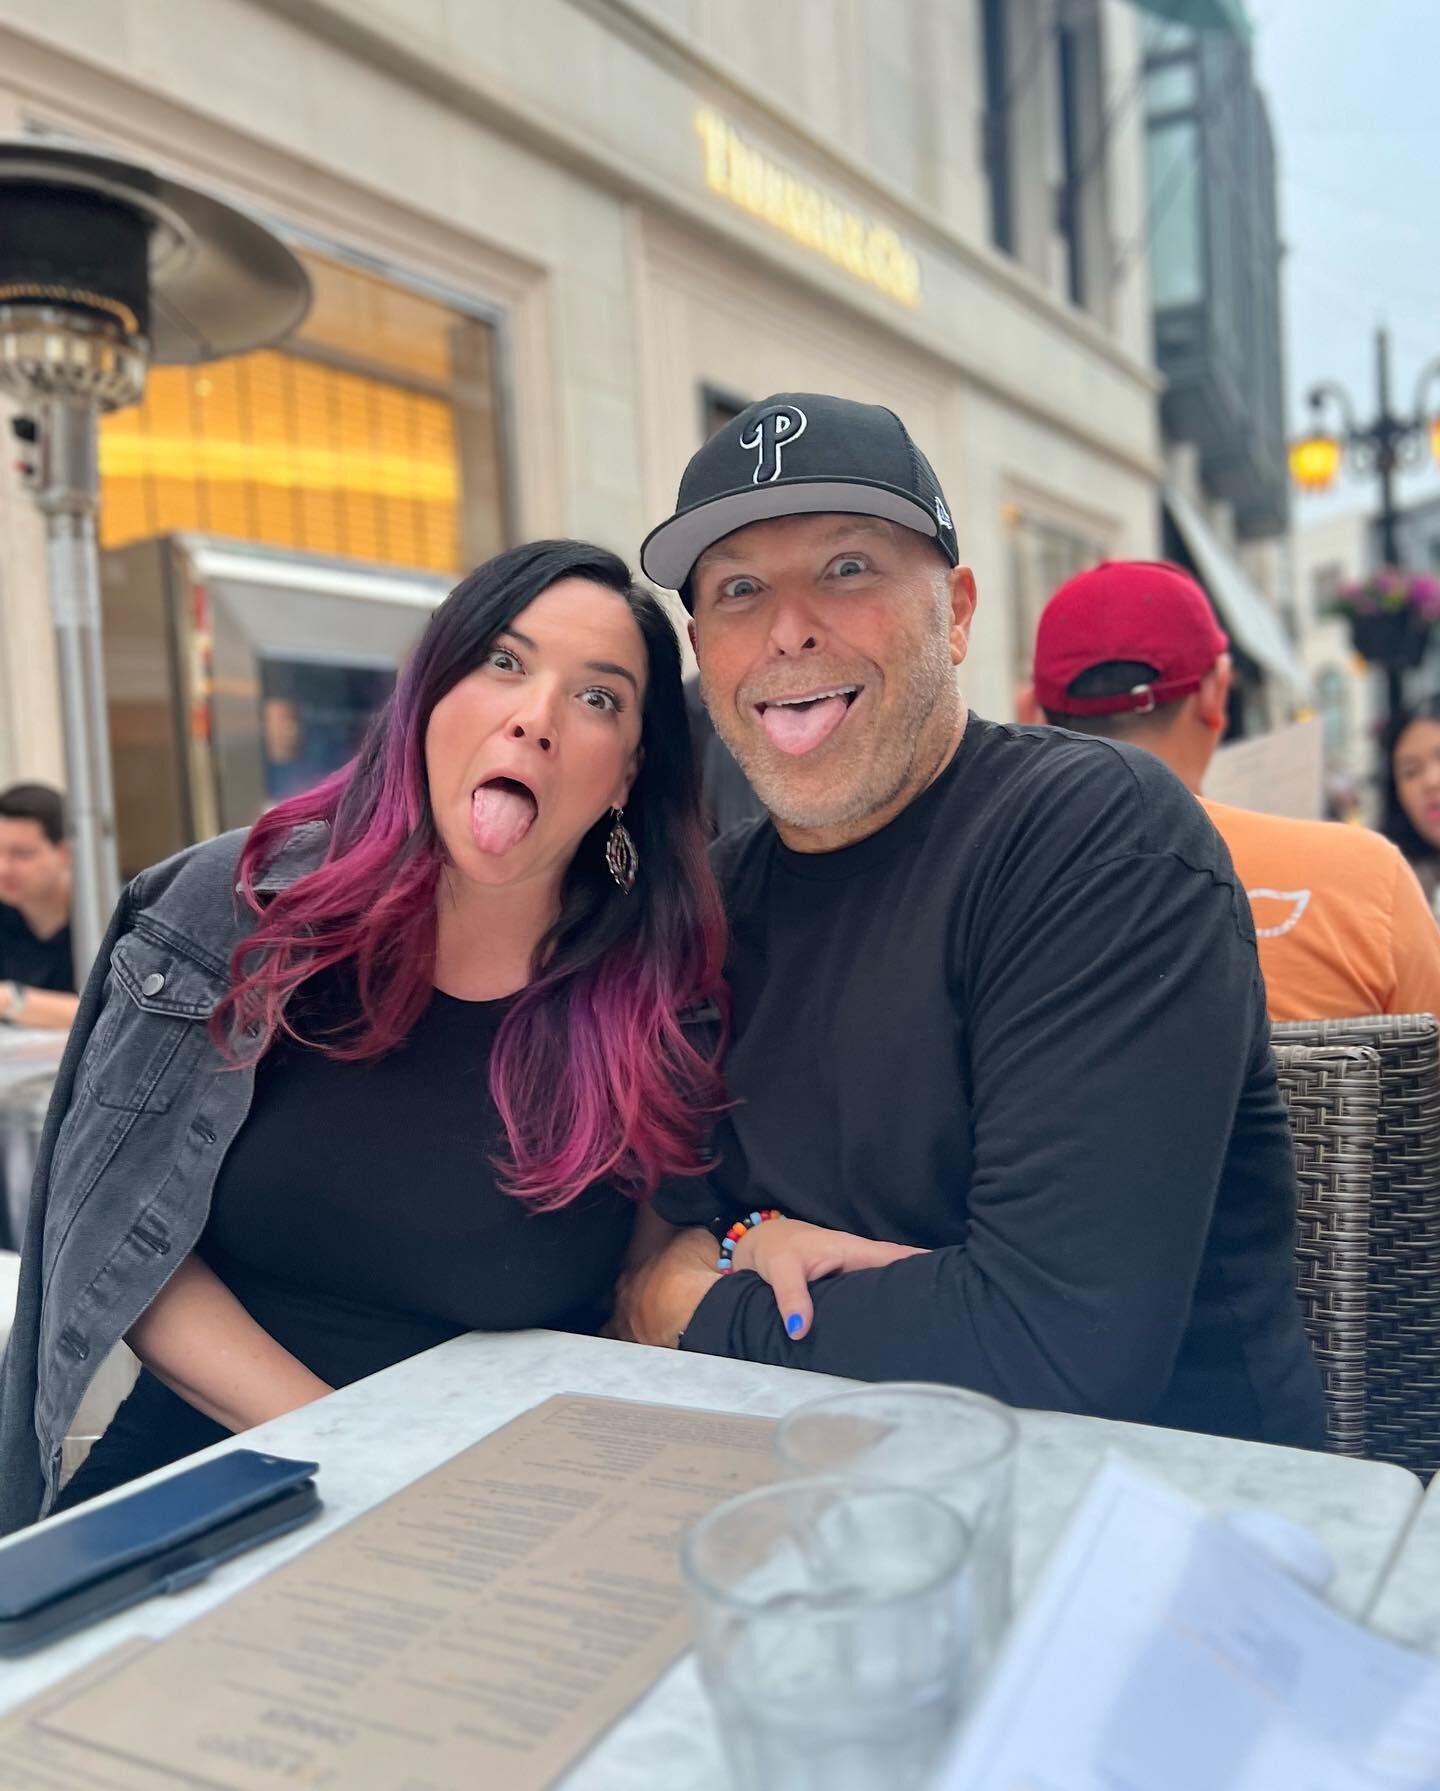 Happy Friday Ya'll! 🥳 
It's amazing to feel pure joy with your someone...
Love, The Ingrams...